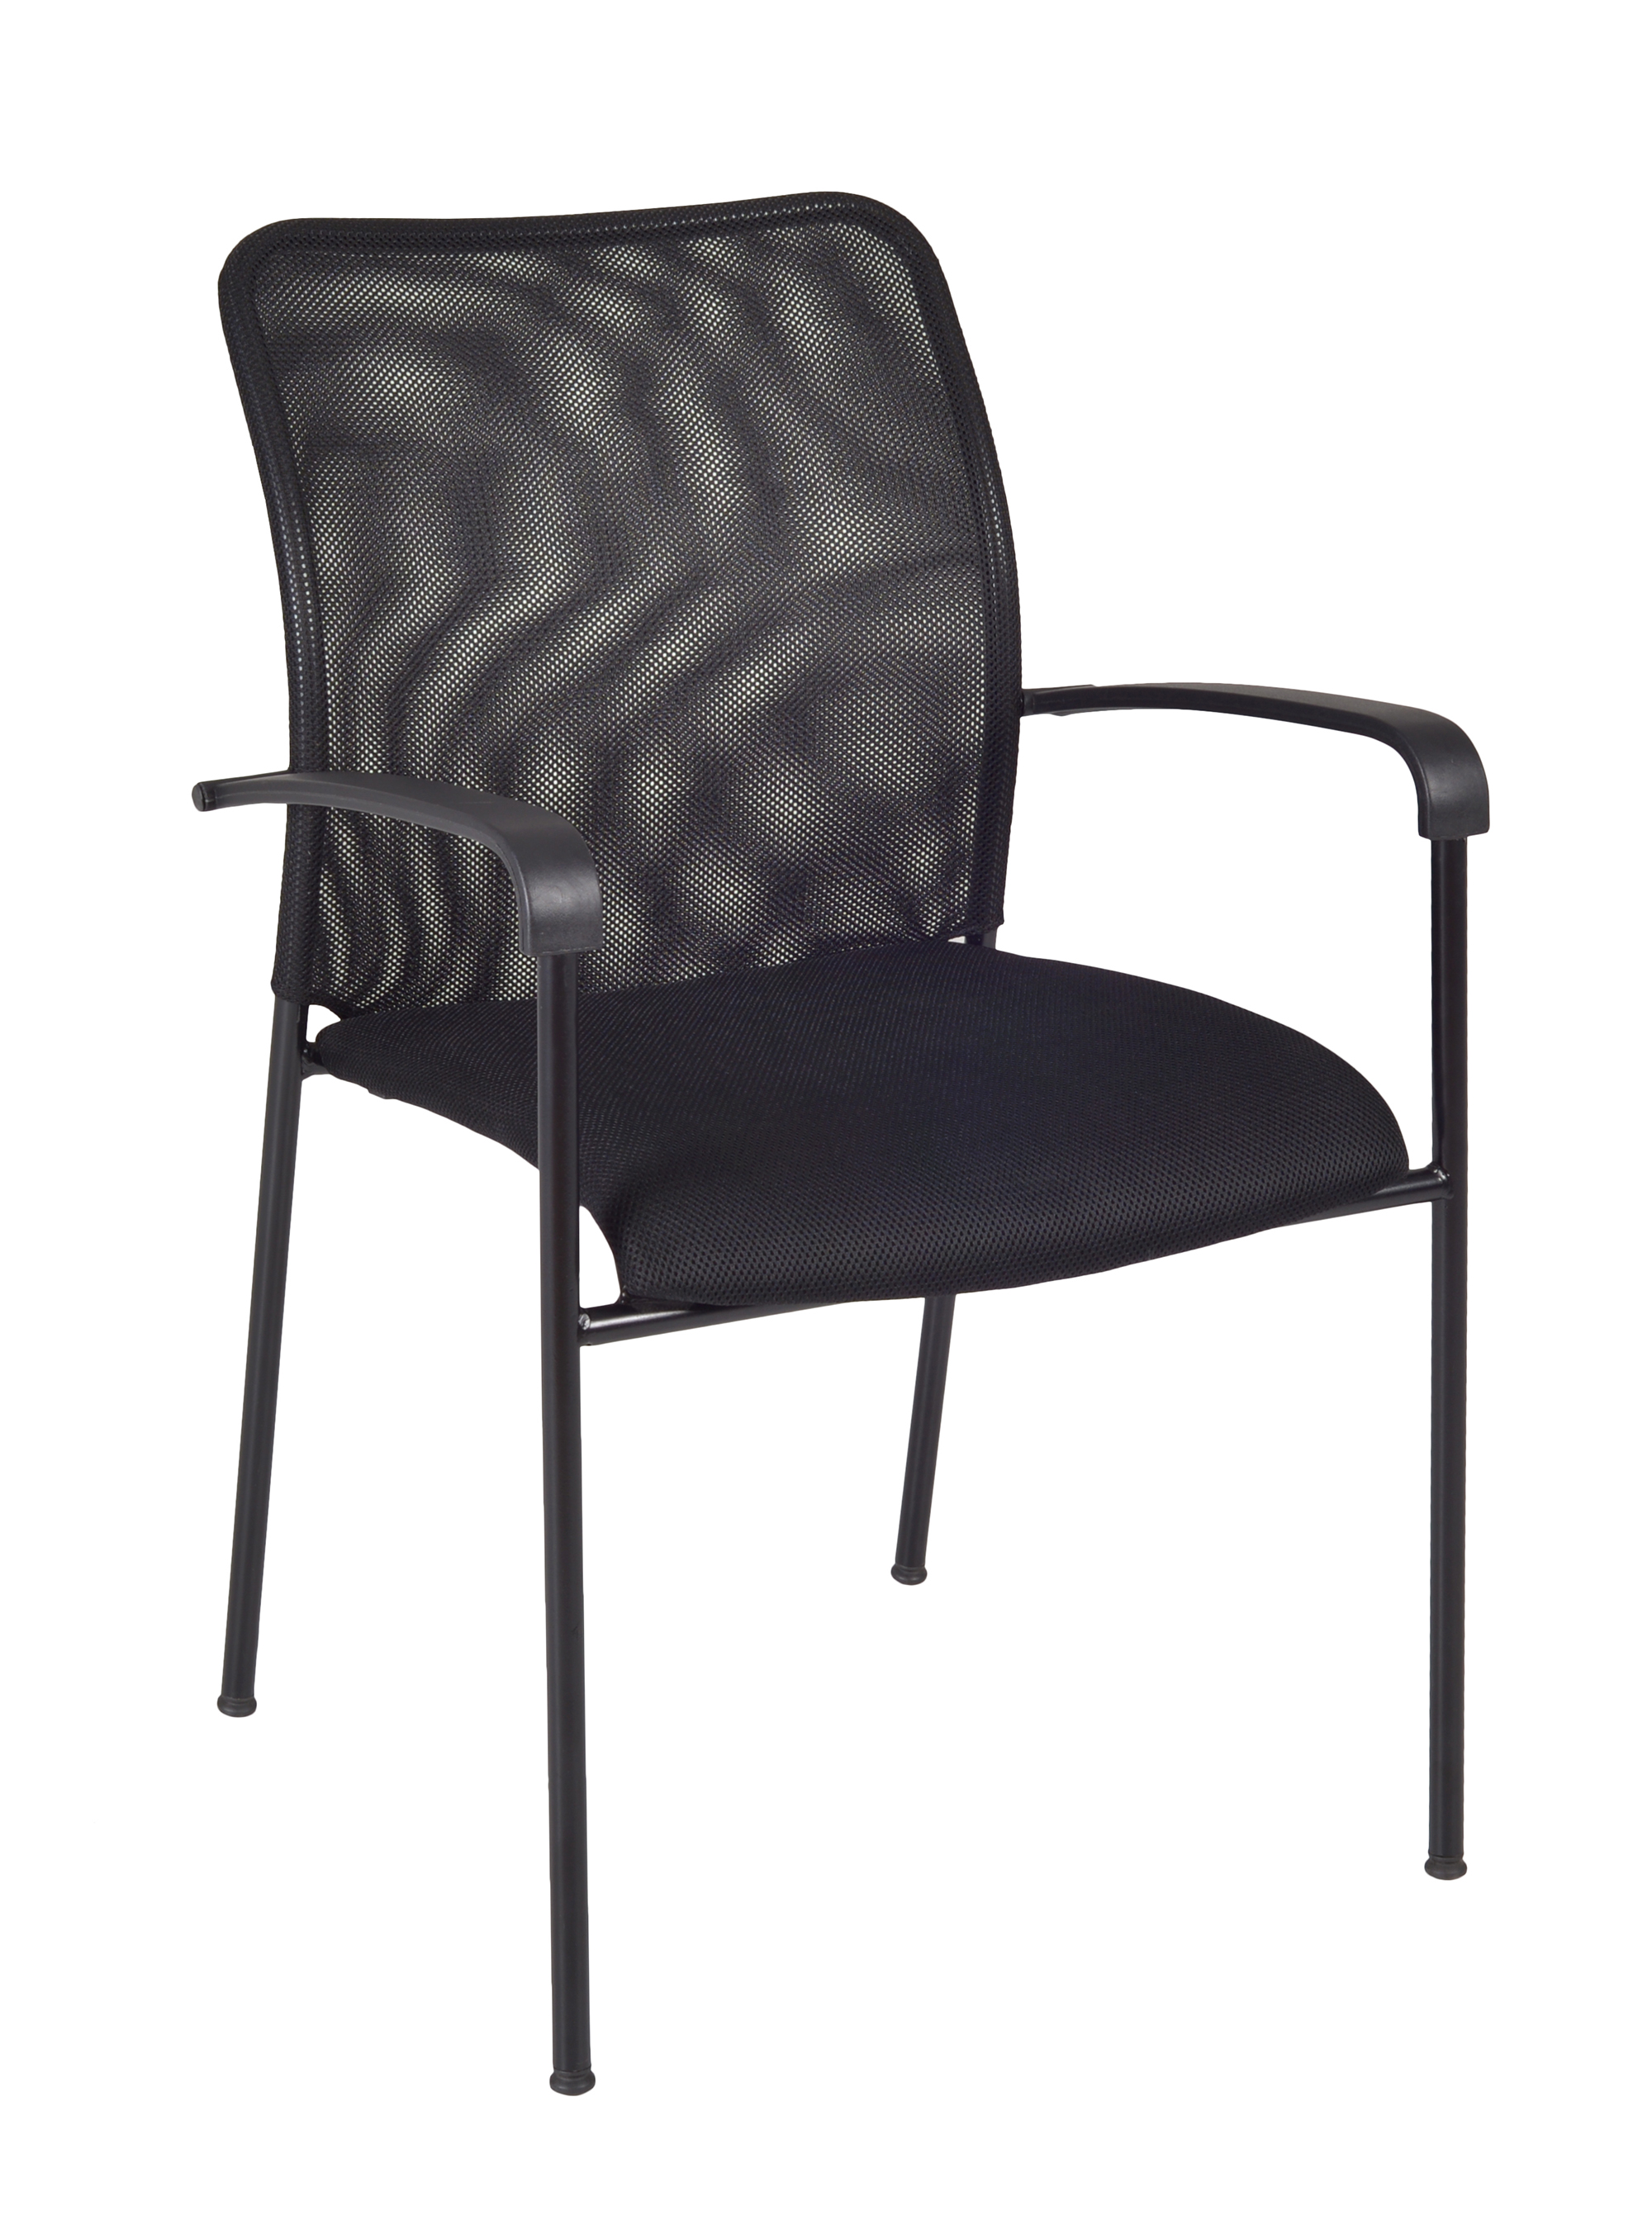 Mario Stack Chair (24 pack)- Black - image 2 of 4